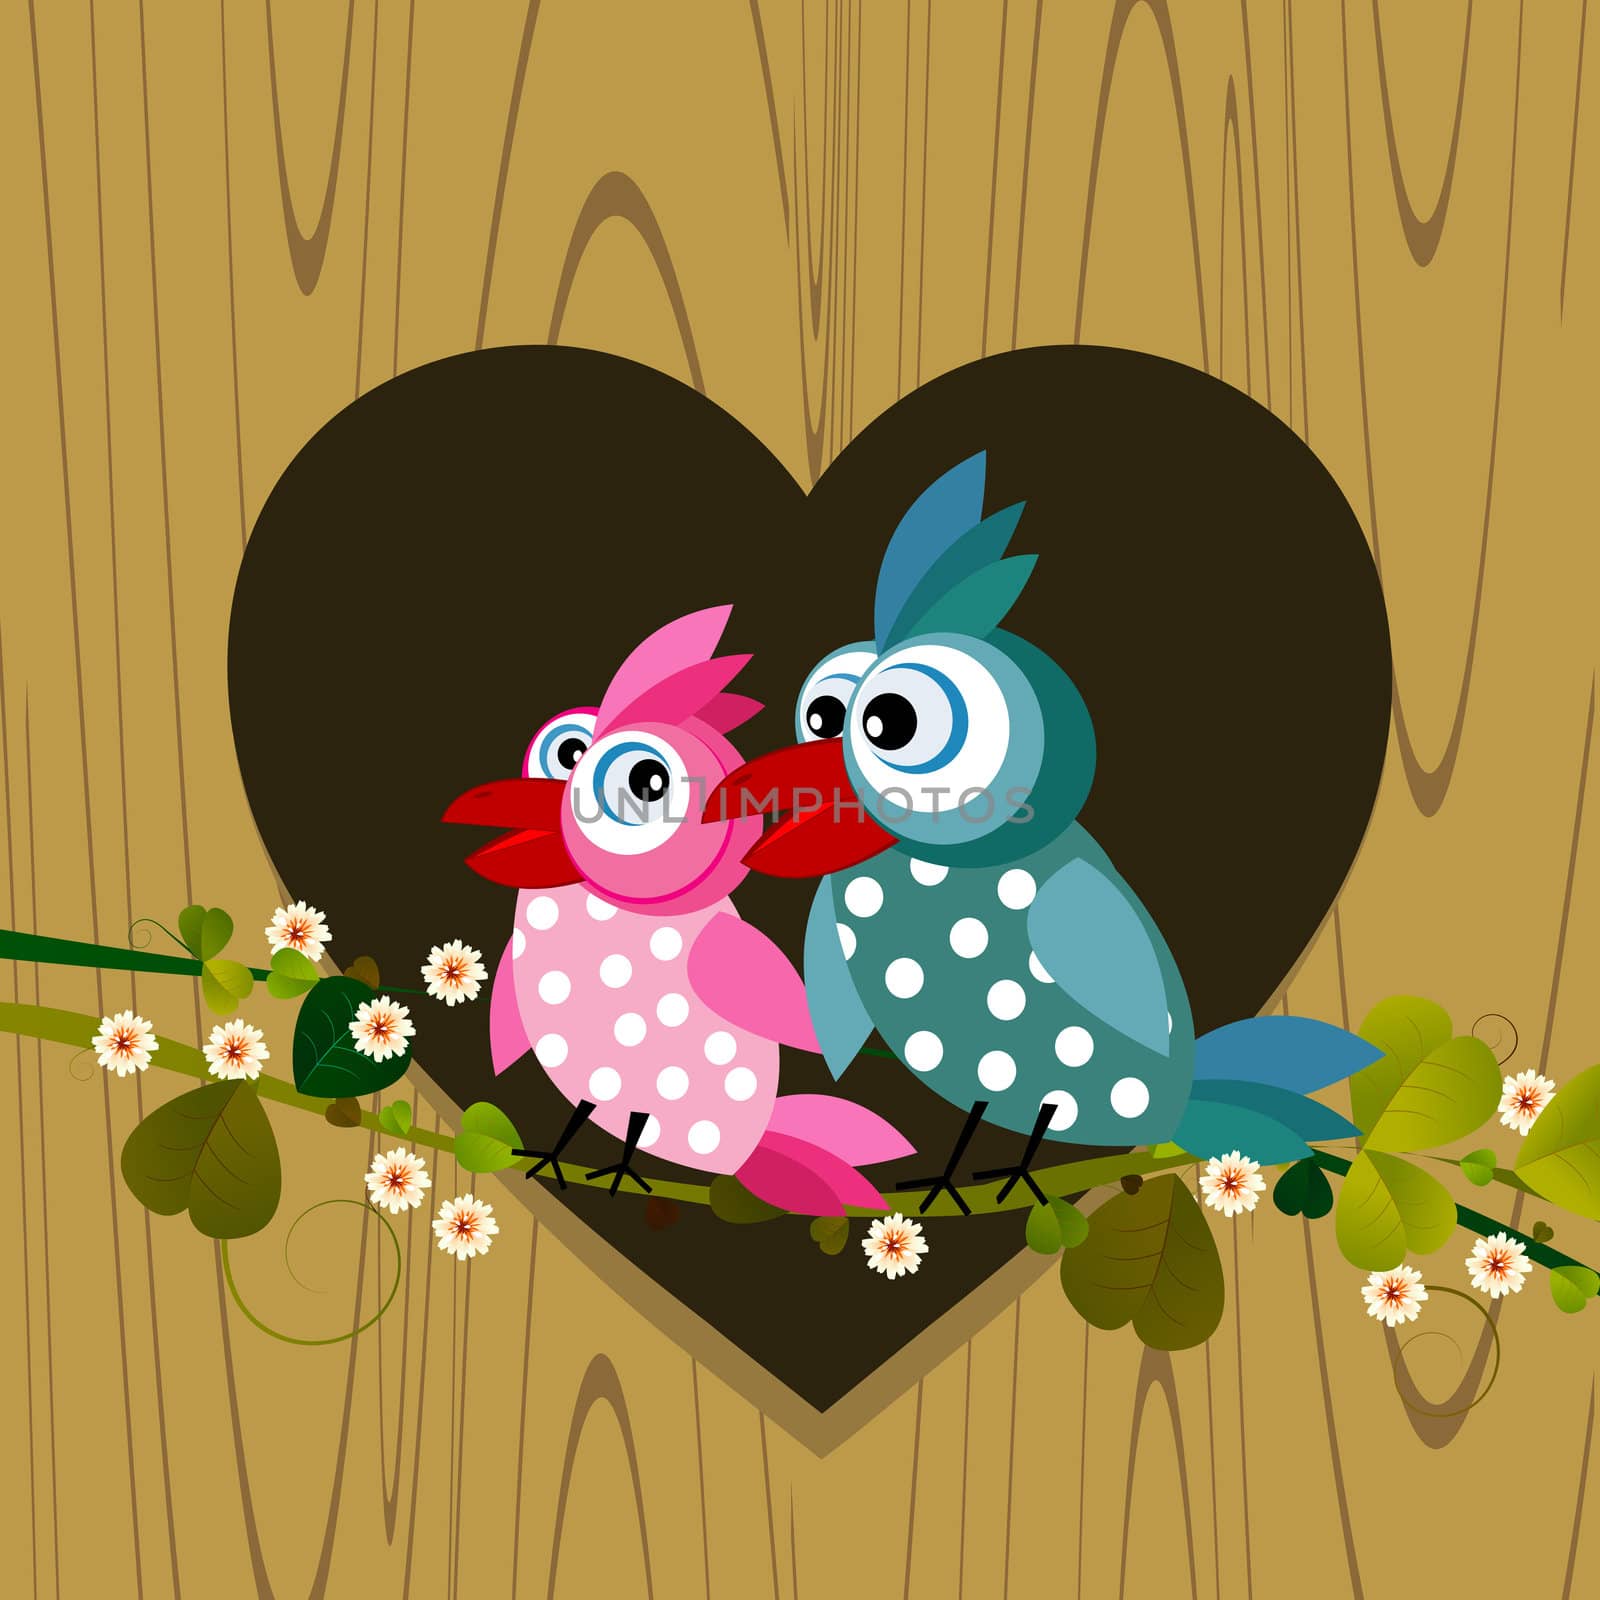 Cartoon background with two birds in love